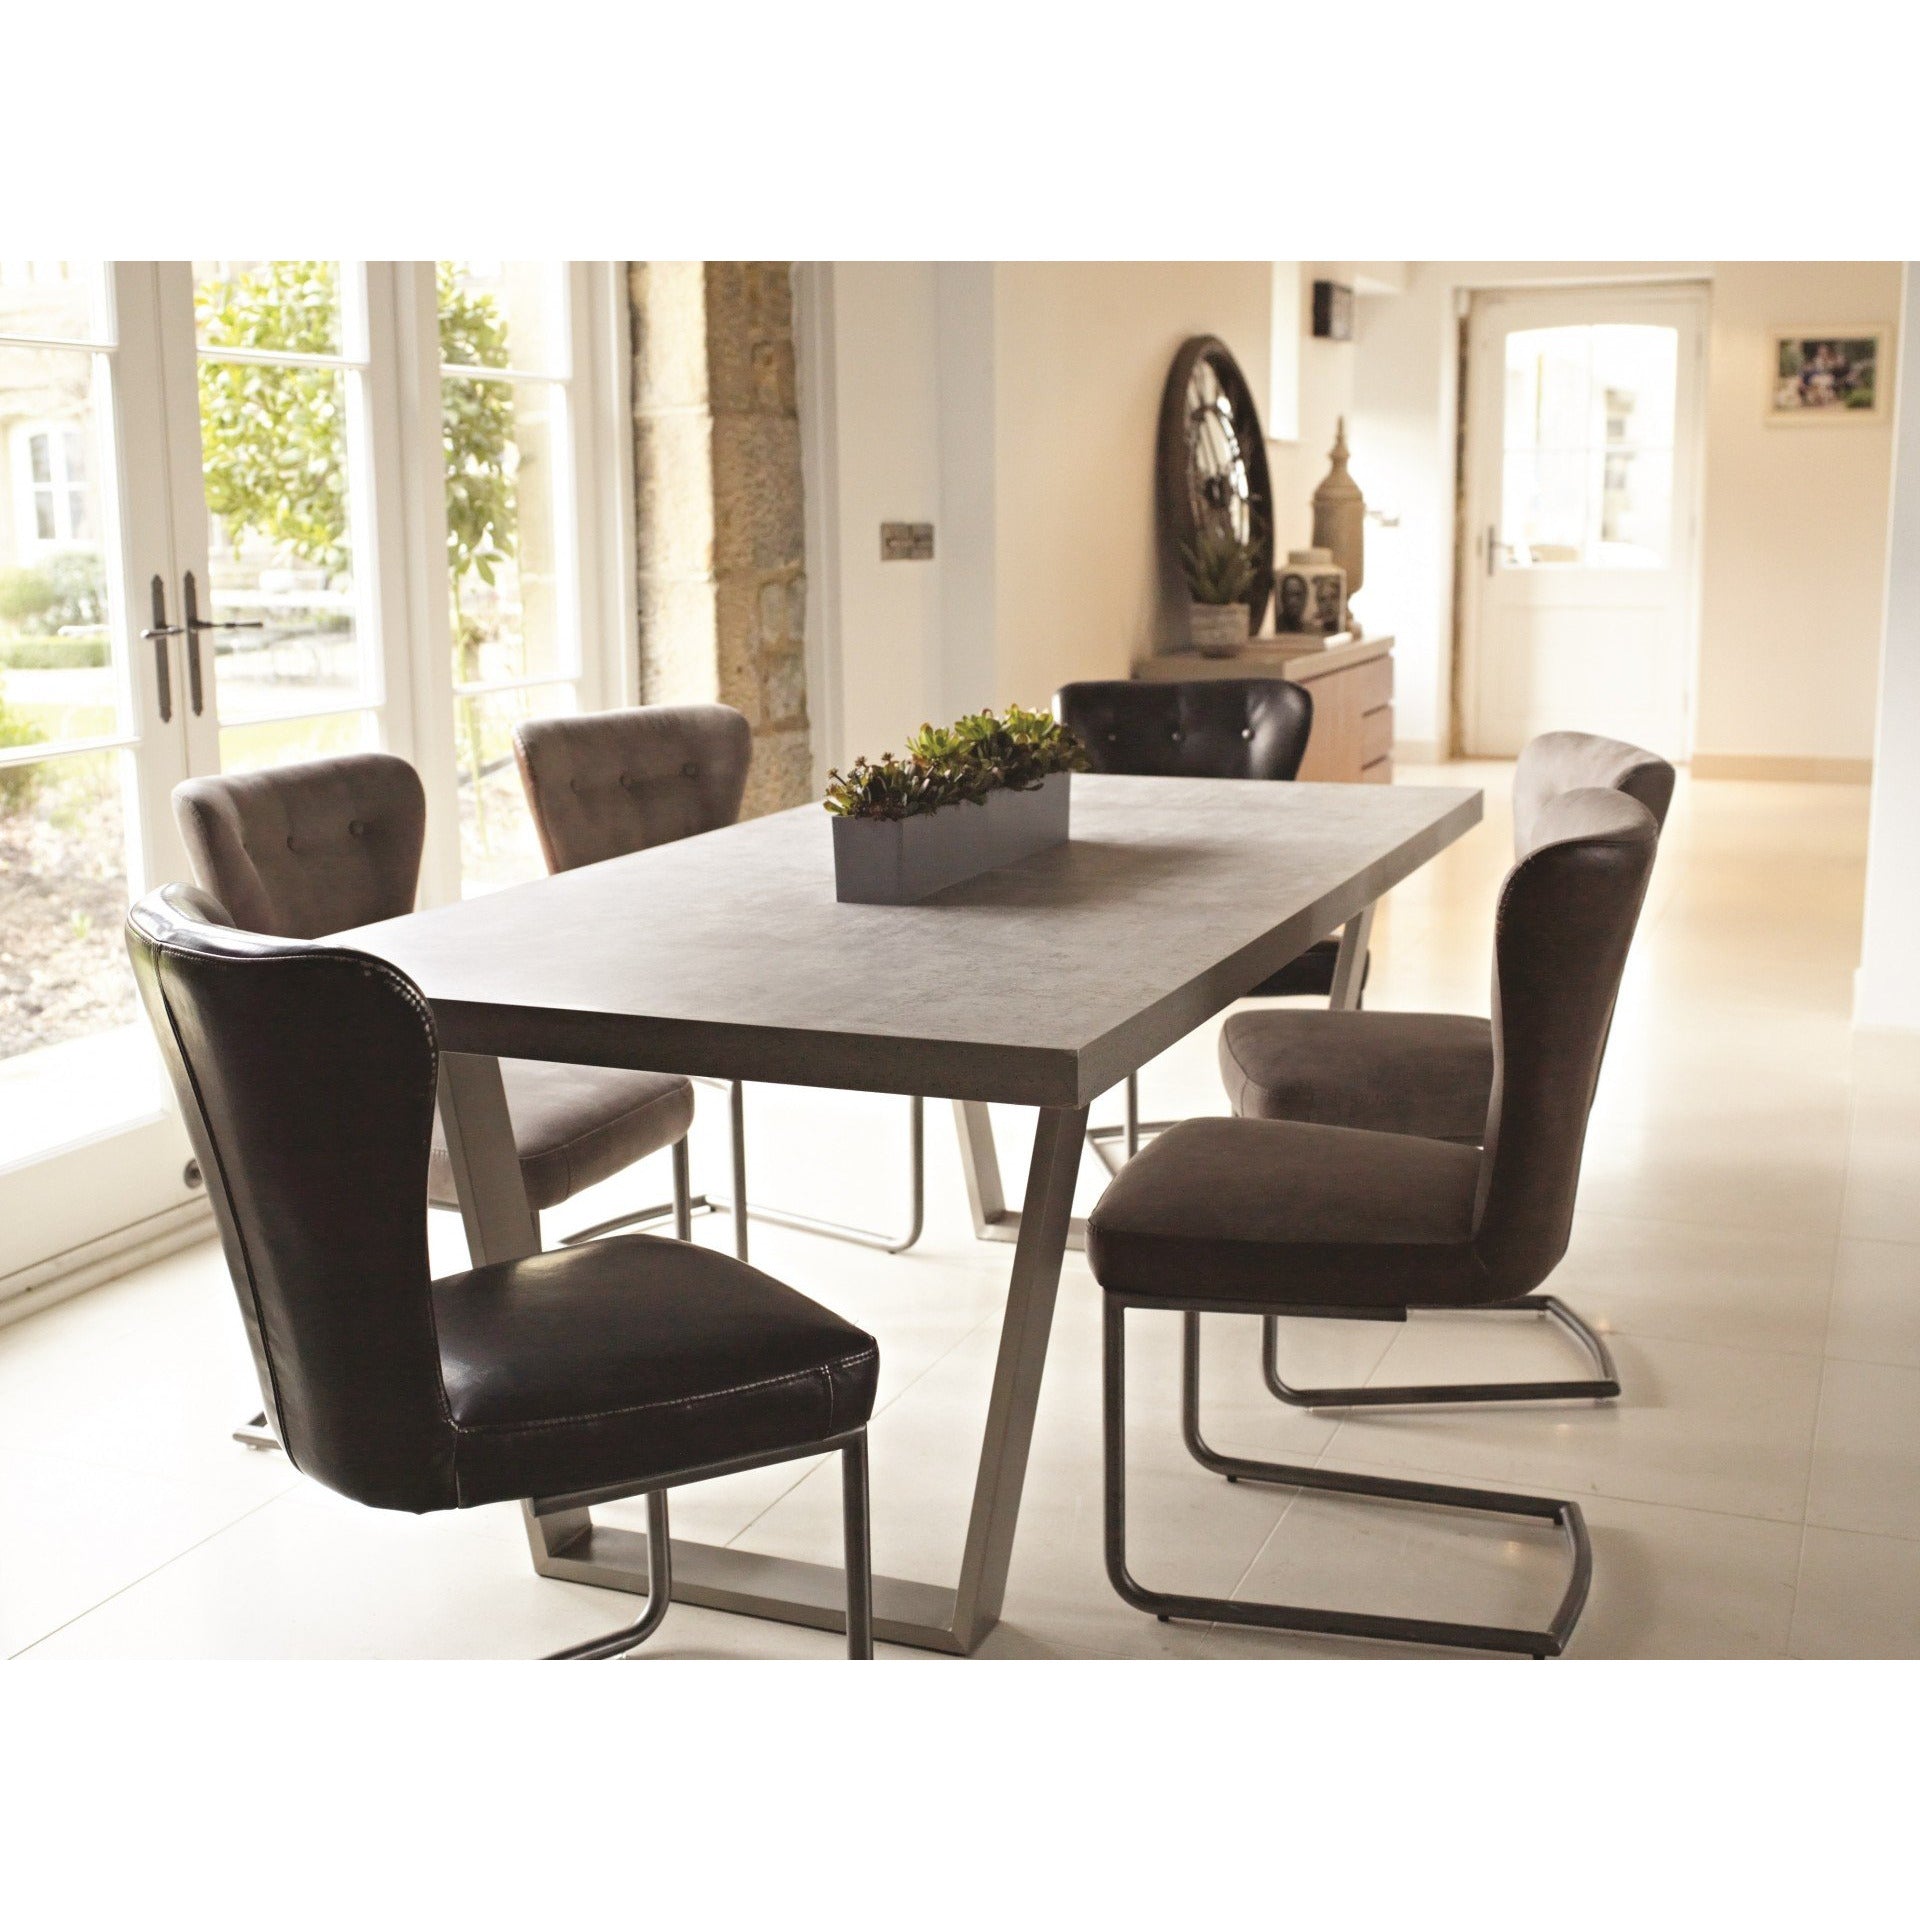 Petra 1.6m Dining Table from Upstairs Downstairs Furniture in Lisburn, Monaghan and Enniskillen